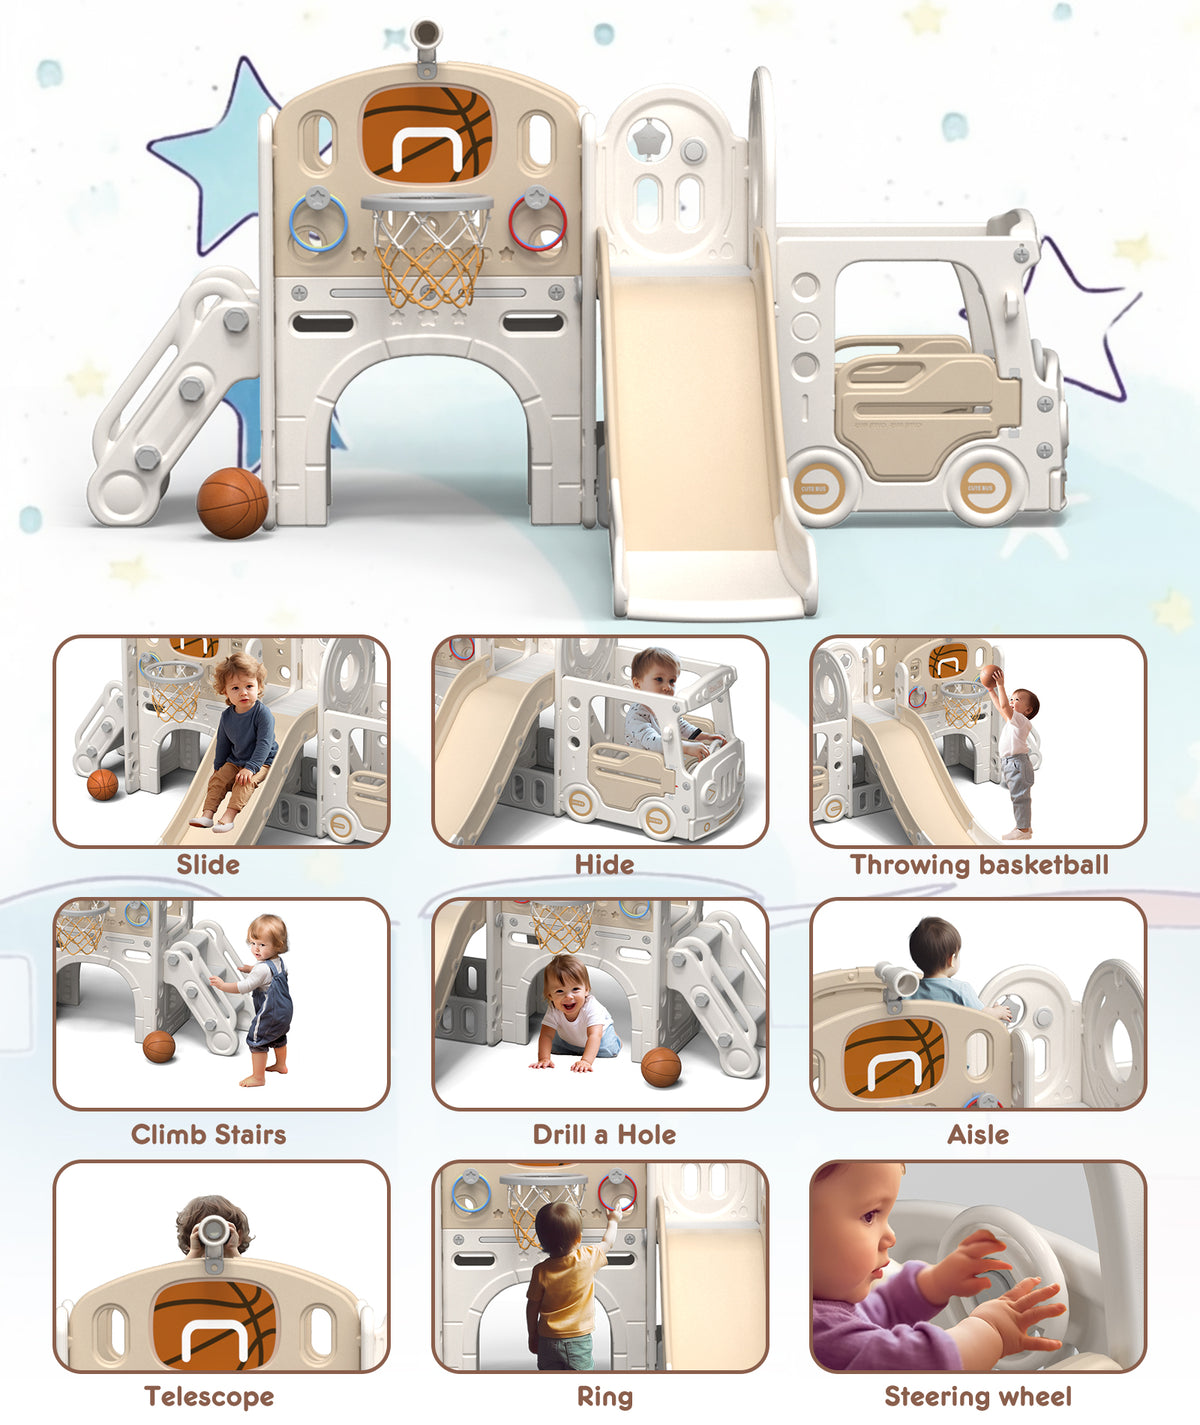 XJD 10-in-1 Toddler Slide Set Freestanding Climber Playset with Basketball Hoop and Ball Versatile Playset for Kids, Beige Coffee